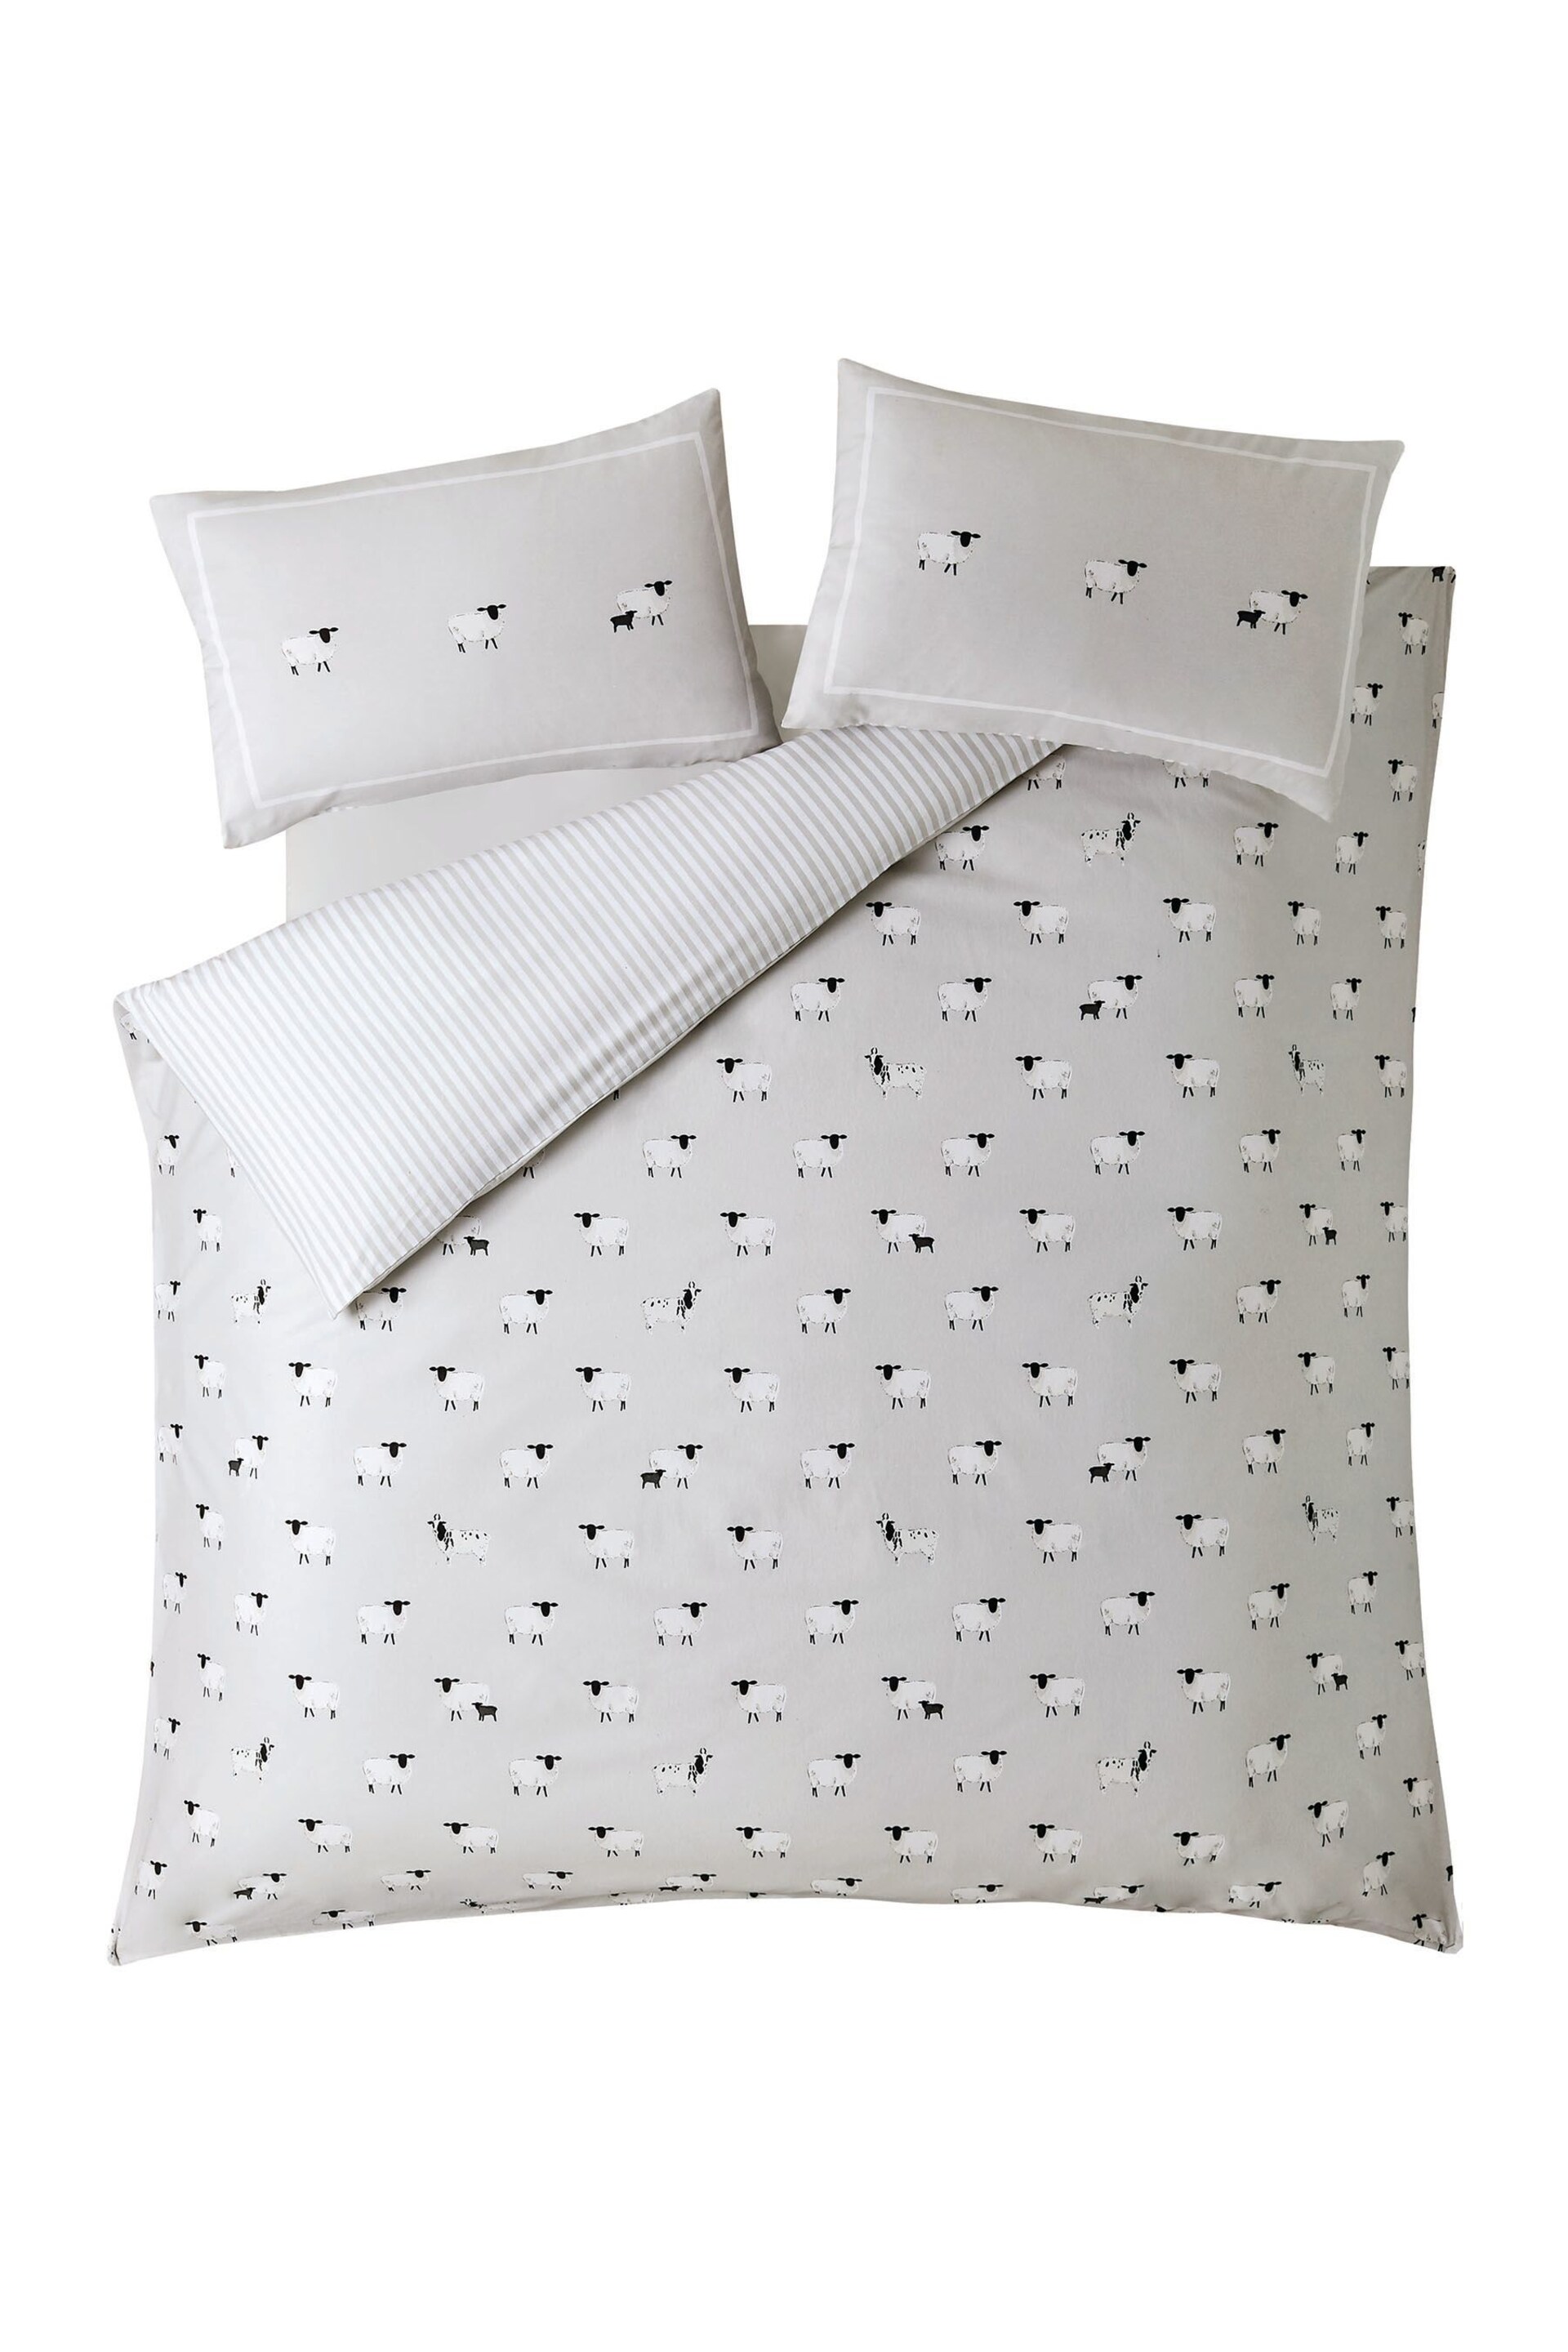 Sophie Allport Oatmeal Sheep Cotton Duvet Cover And Pillowcase Set - Image 2 of 5